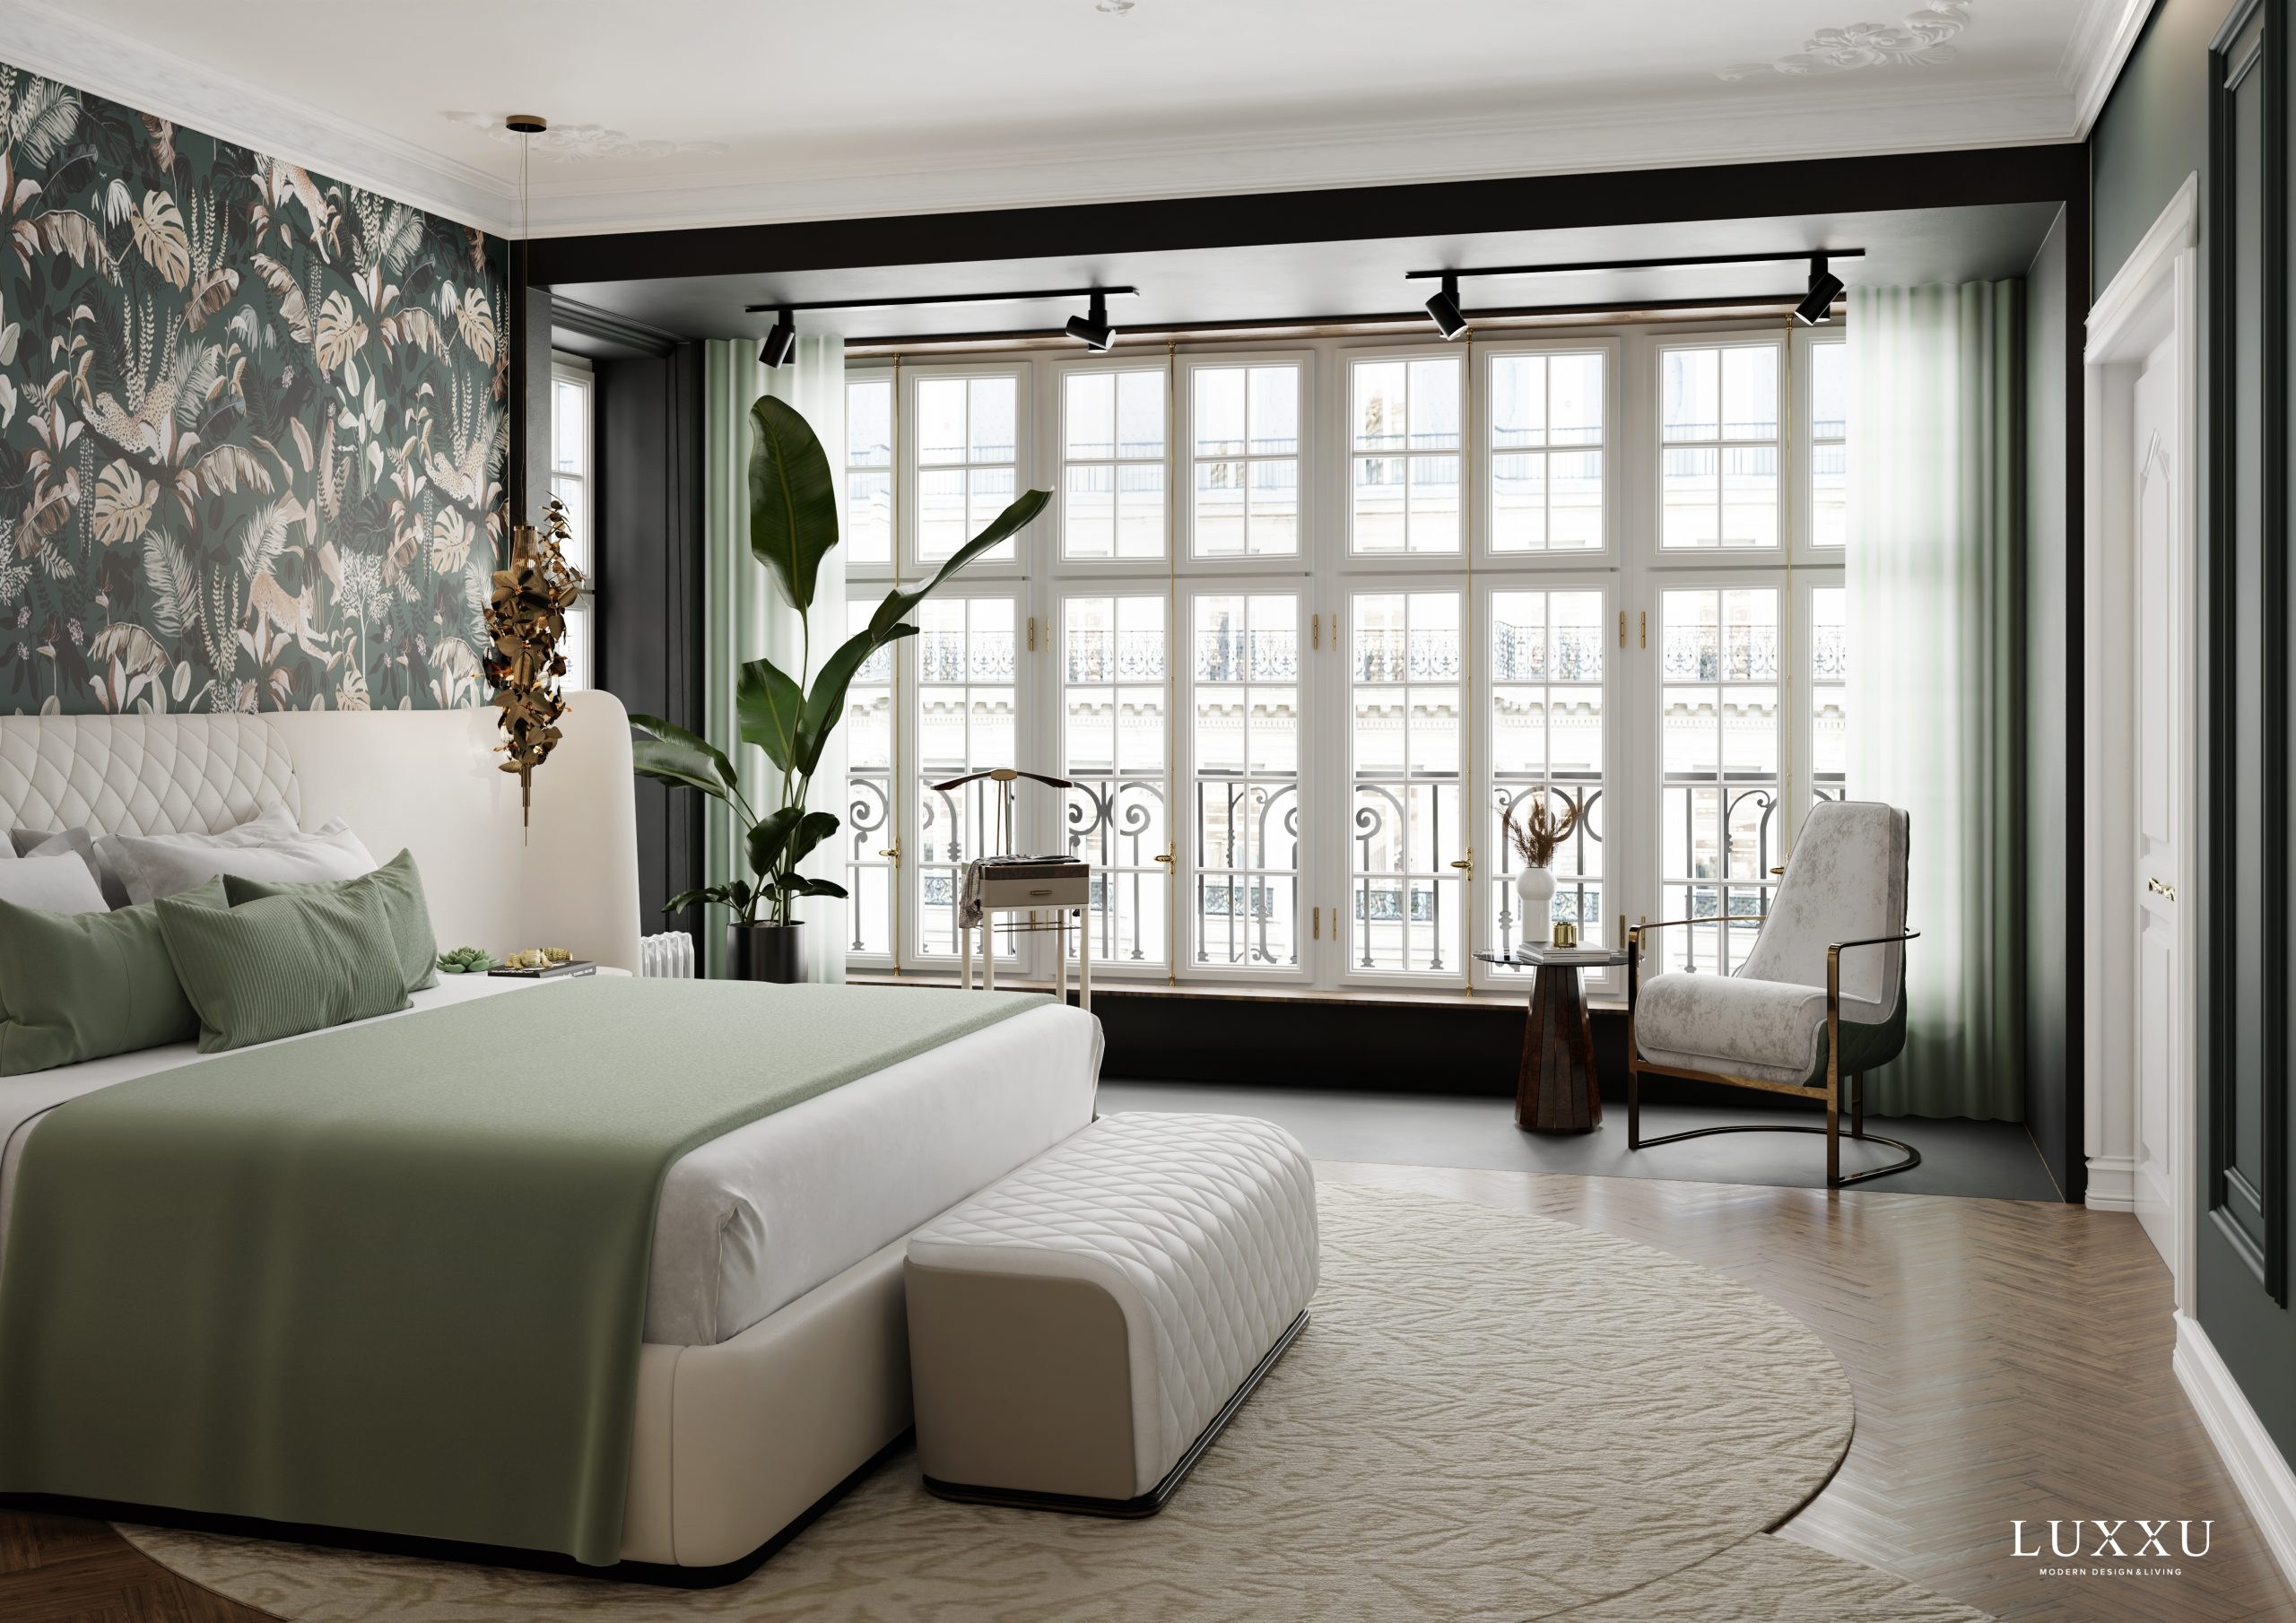 Bedroom Design - Wake Up Luxuriously In The City Of Lights